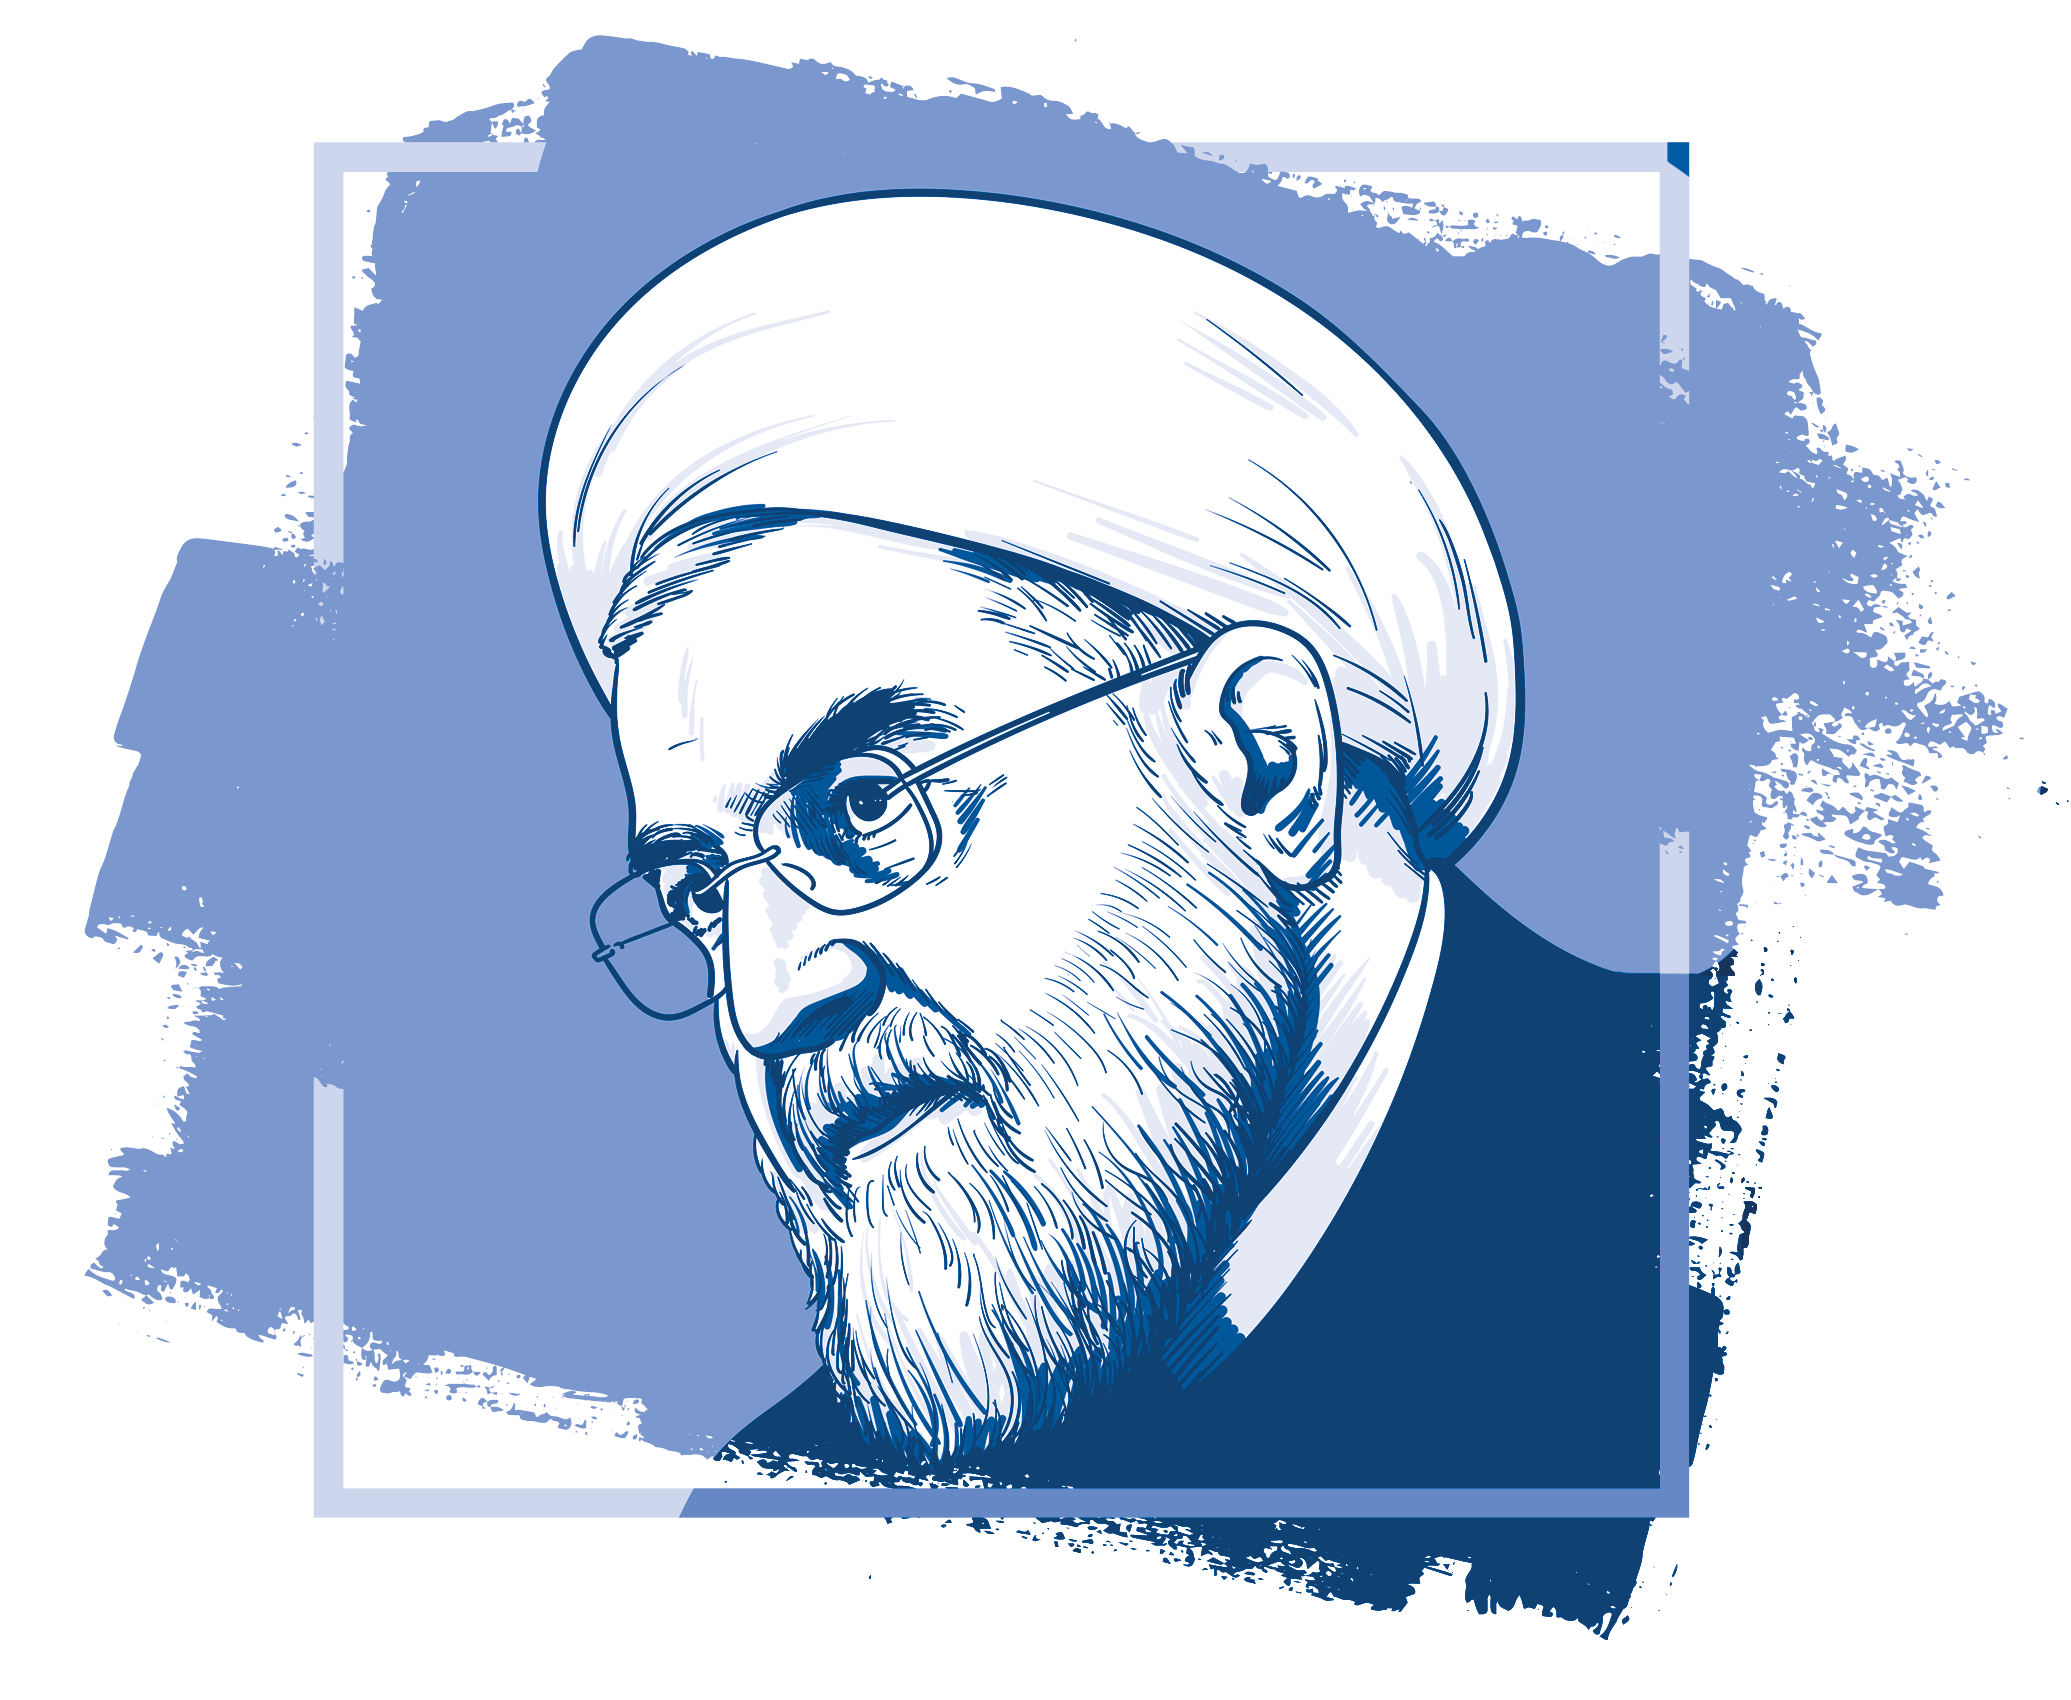 Drawing of Hassan Rouhani, former President of Iran